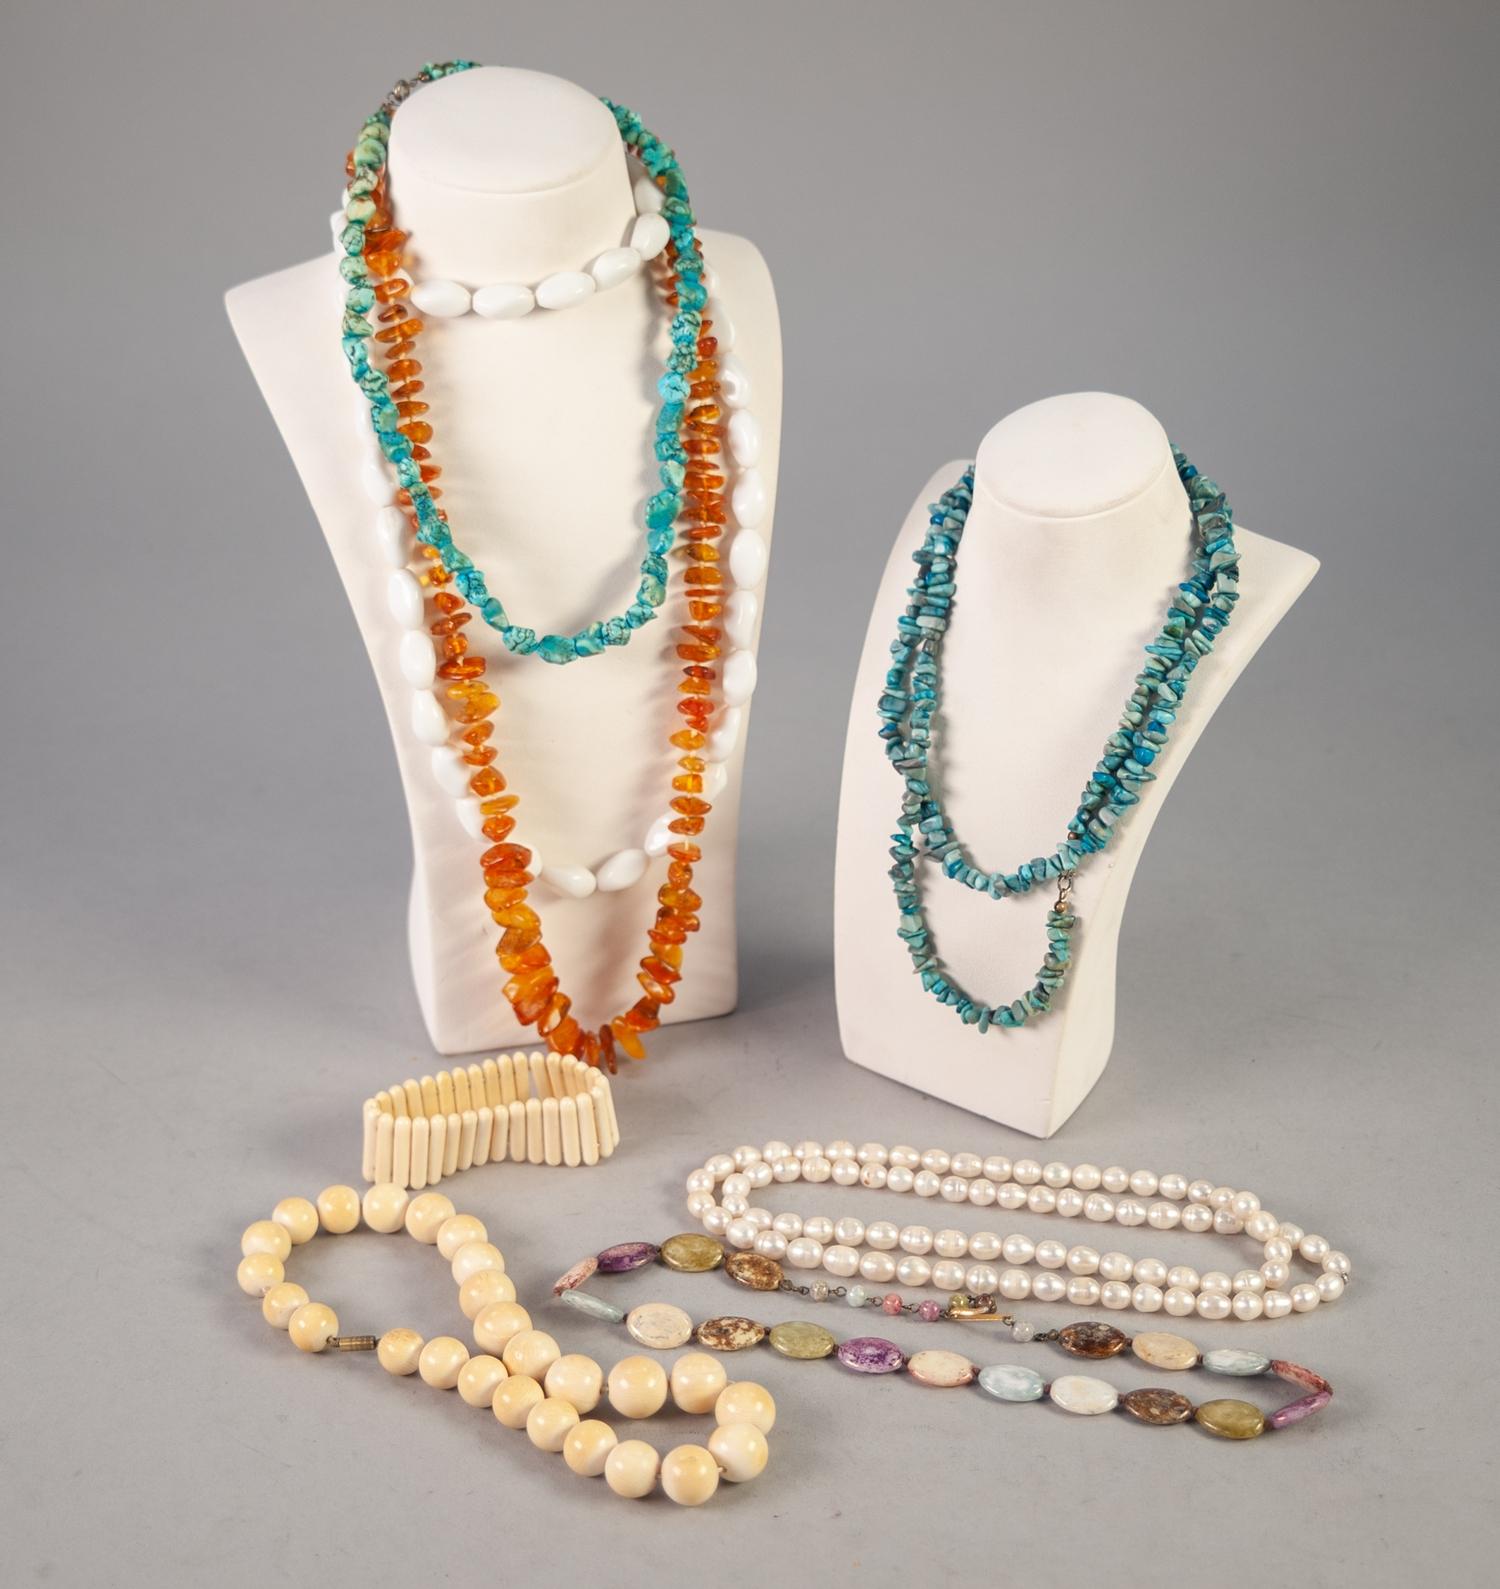 AMBER CHIP BEAD NECKLACE, TWO TURQUOISE CHIP BEAD NECKLACES, A NECKLACE OF VARIOUS HARDSTONE